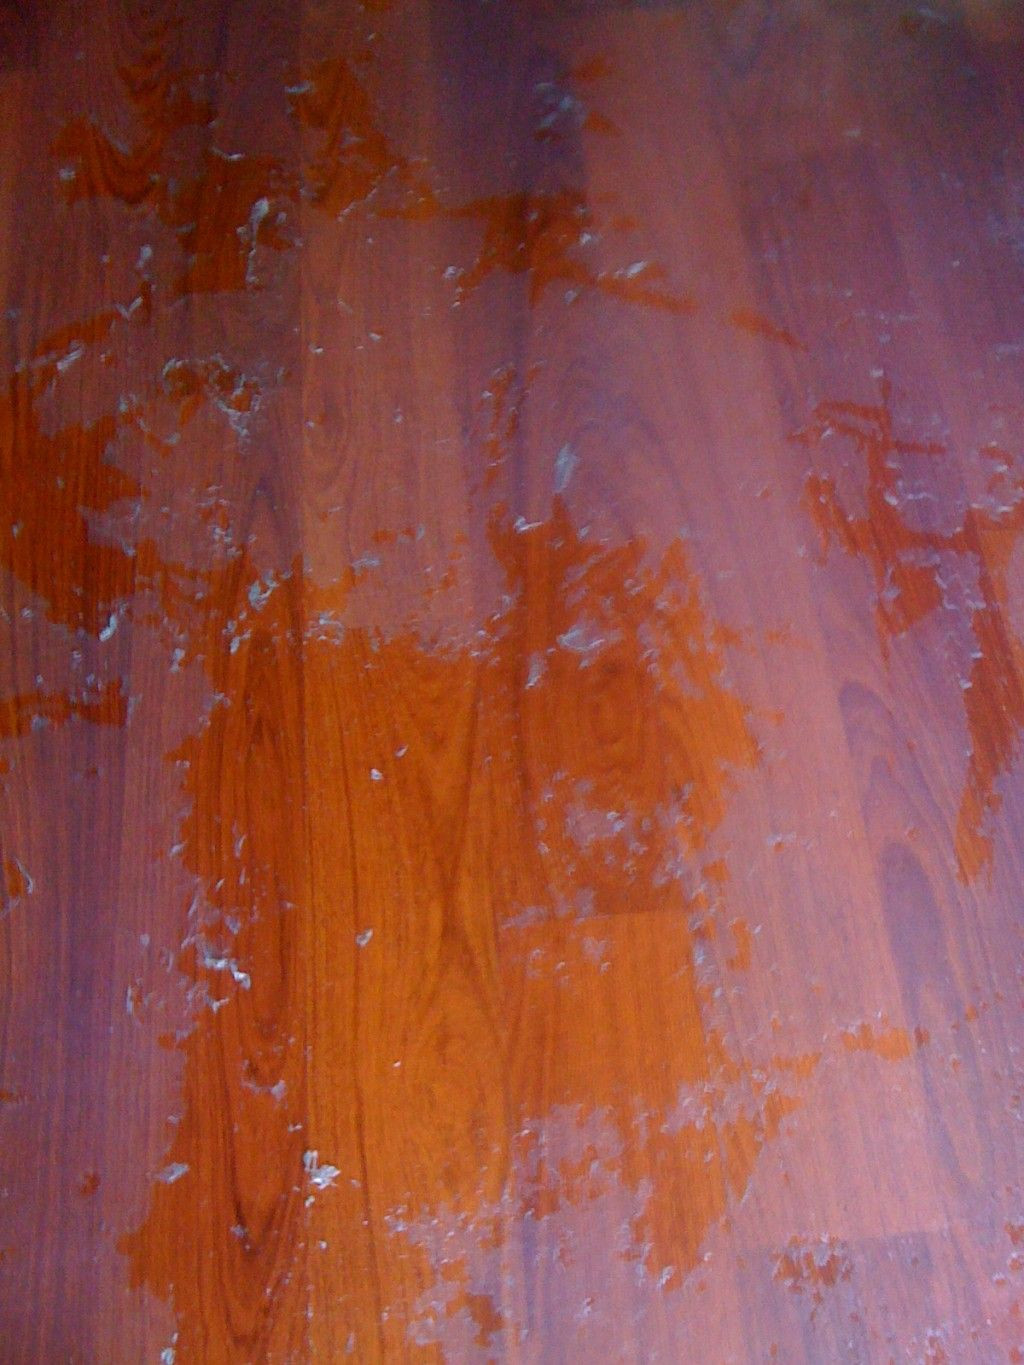 how to refill bona hardwood floor cleaner of how to remove wax and oil soap cleaners from wood floors recipes with how to remove oily or wax build up from cleaning or polishing solutions from wood floors